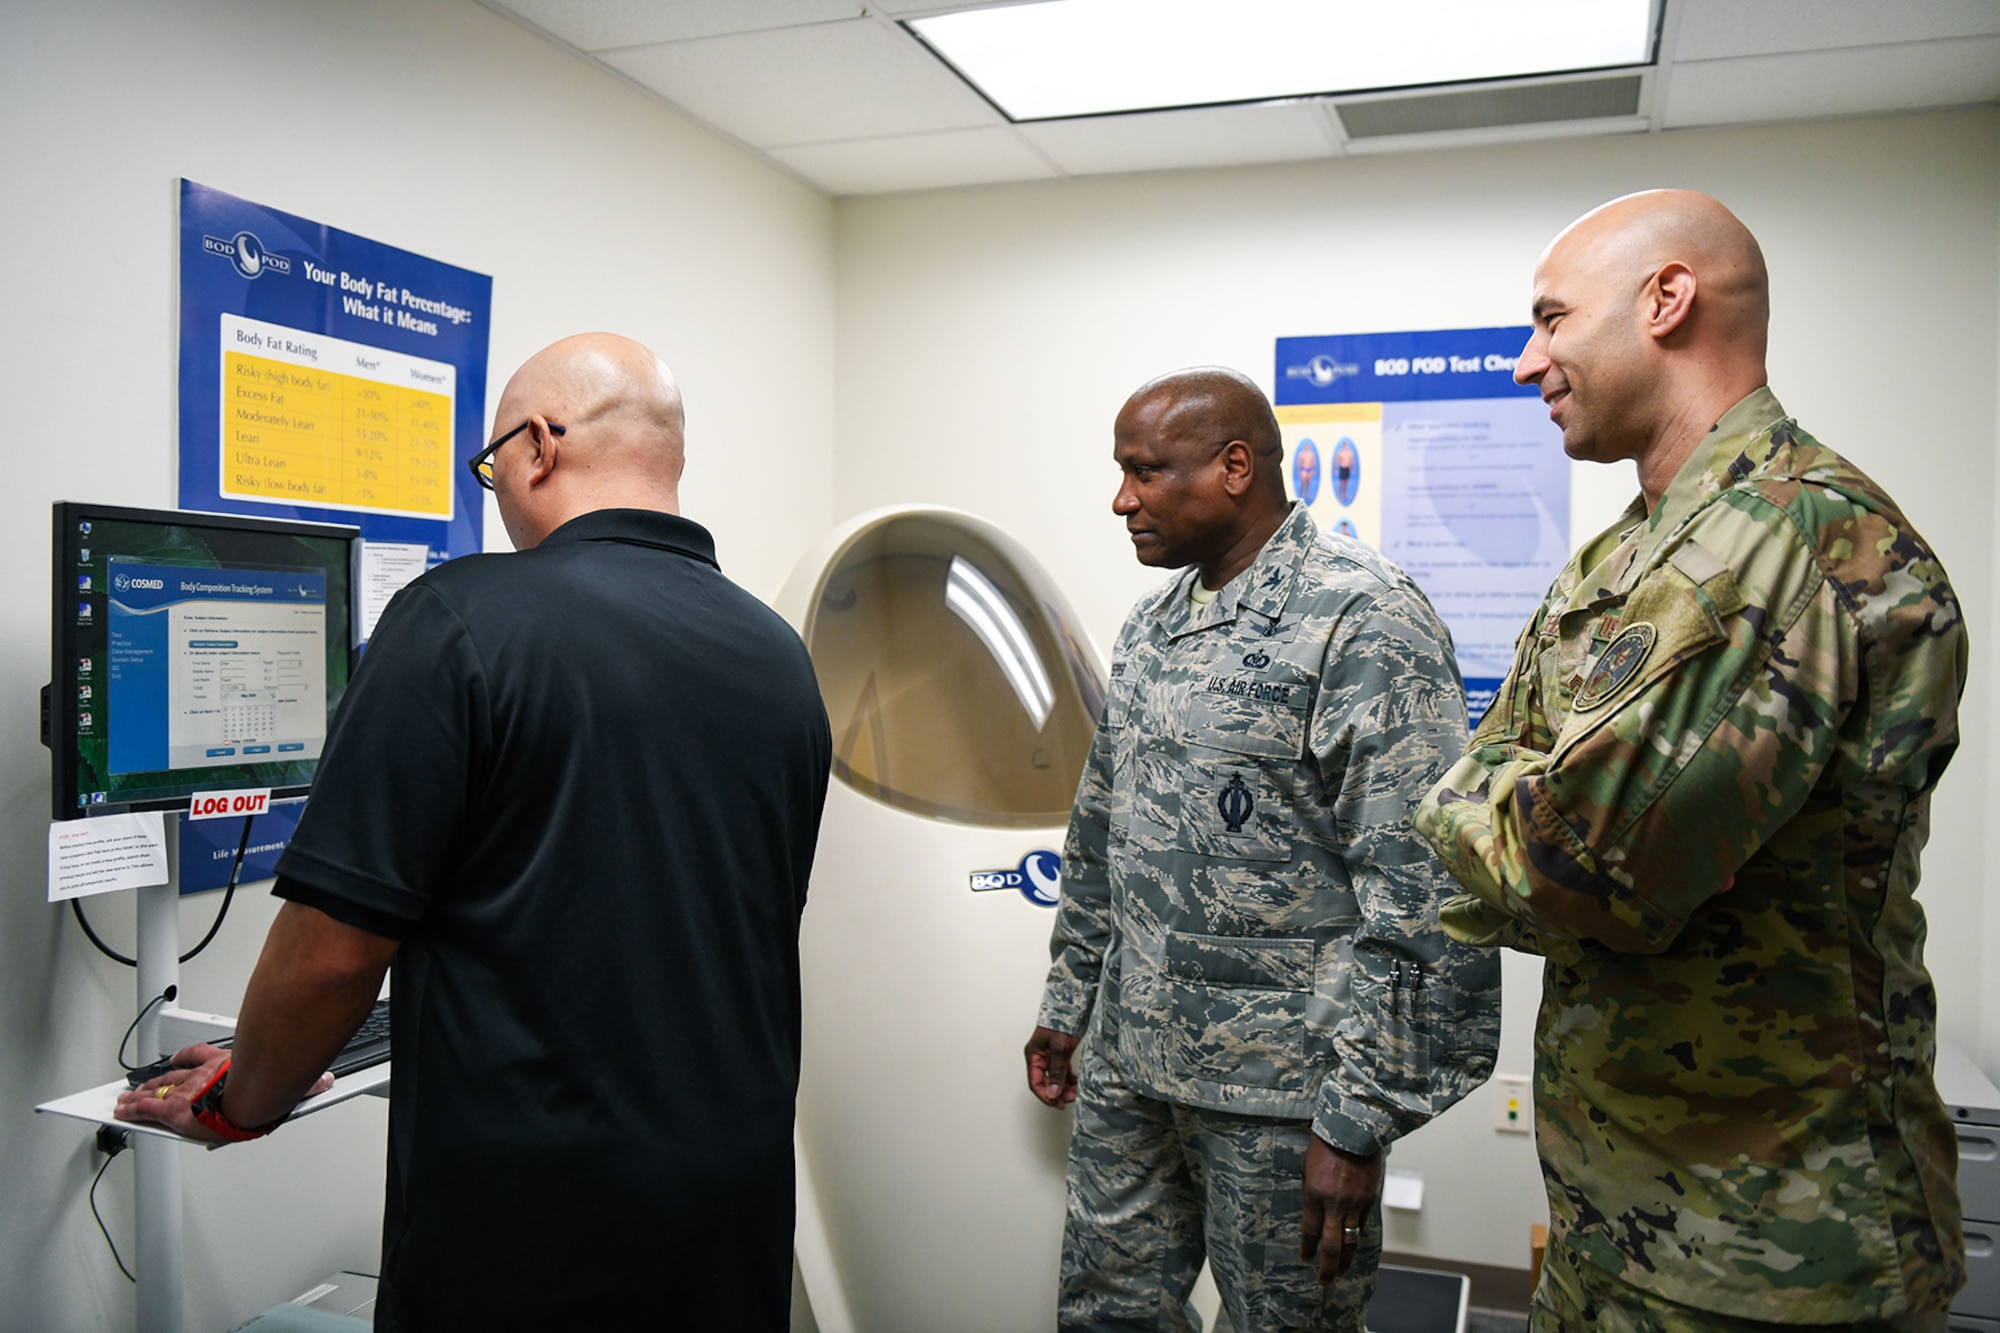 Alan Muriera, 460th Medical Group health promotion manager, begins inputting information into a computer with Col. Devin Pepper, 460th Space Wing commander, Chief Master Sgt. Robert Devall, 460th Space Wing command chief, March 5, 2020, at the Human Performance Center at Buckley Air Force Base, Colo.